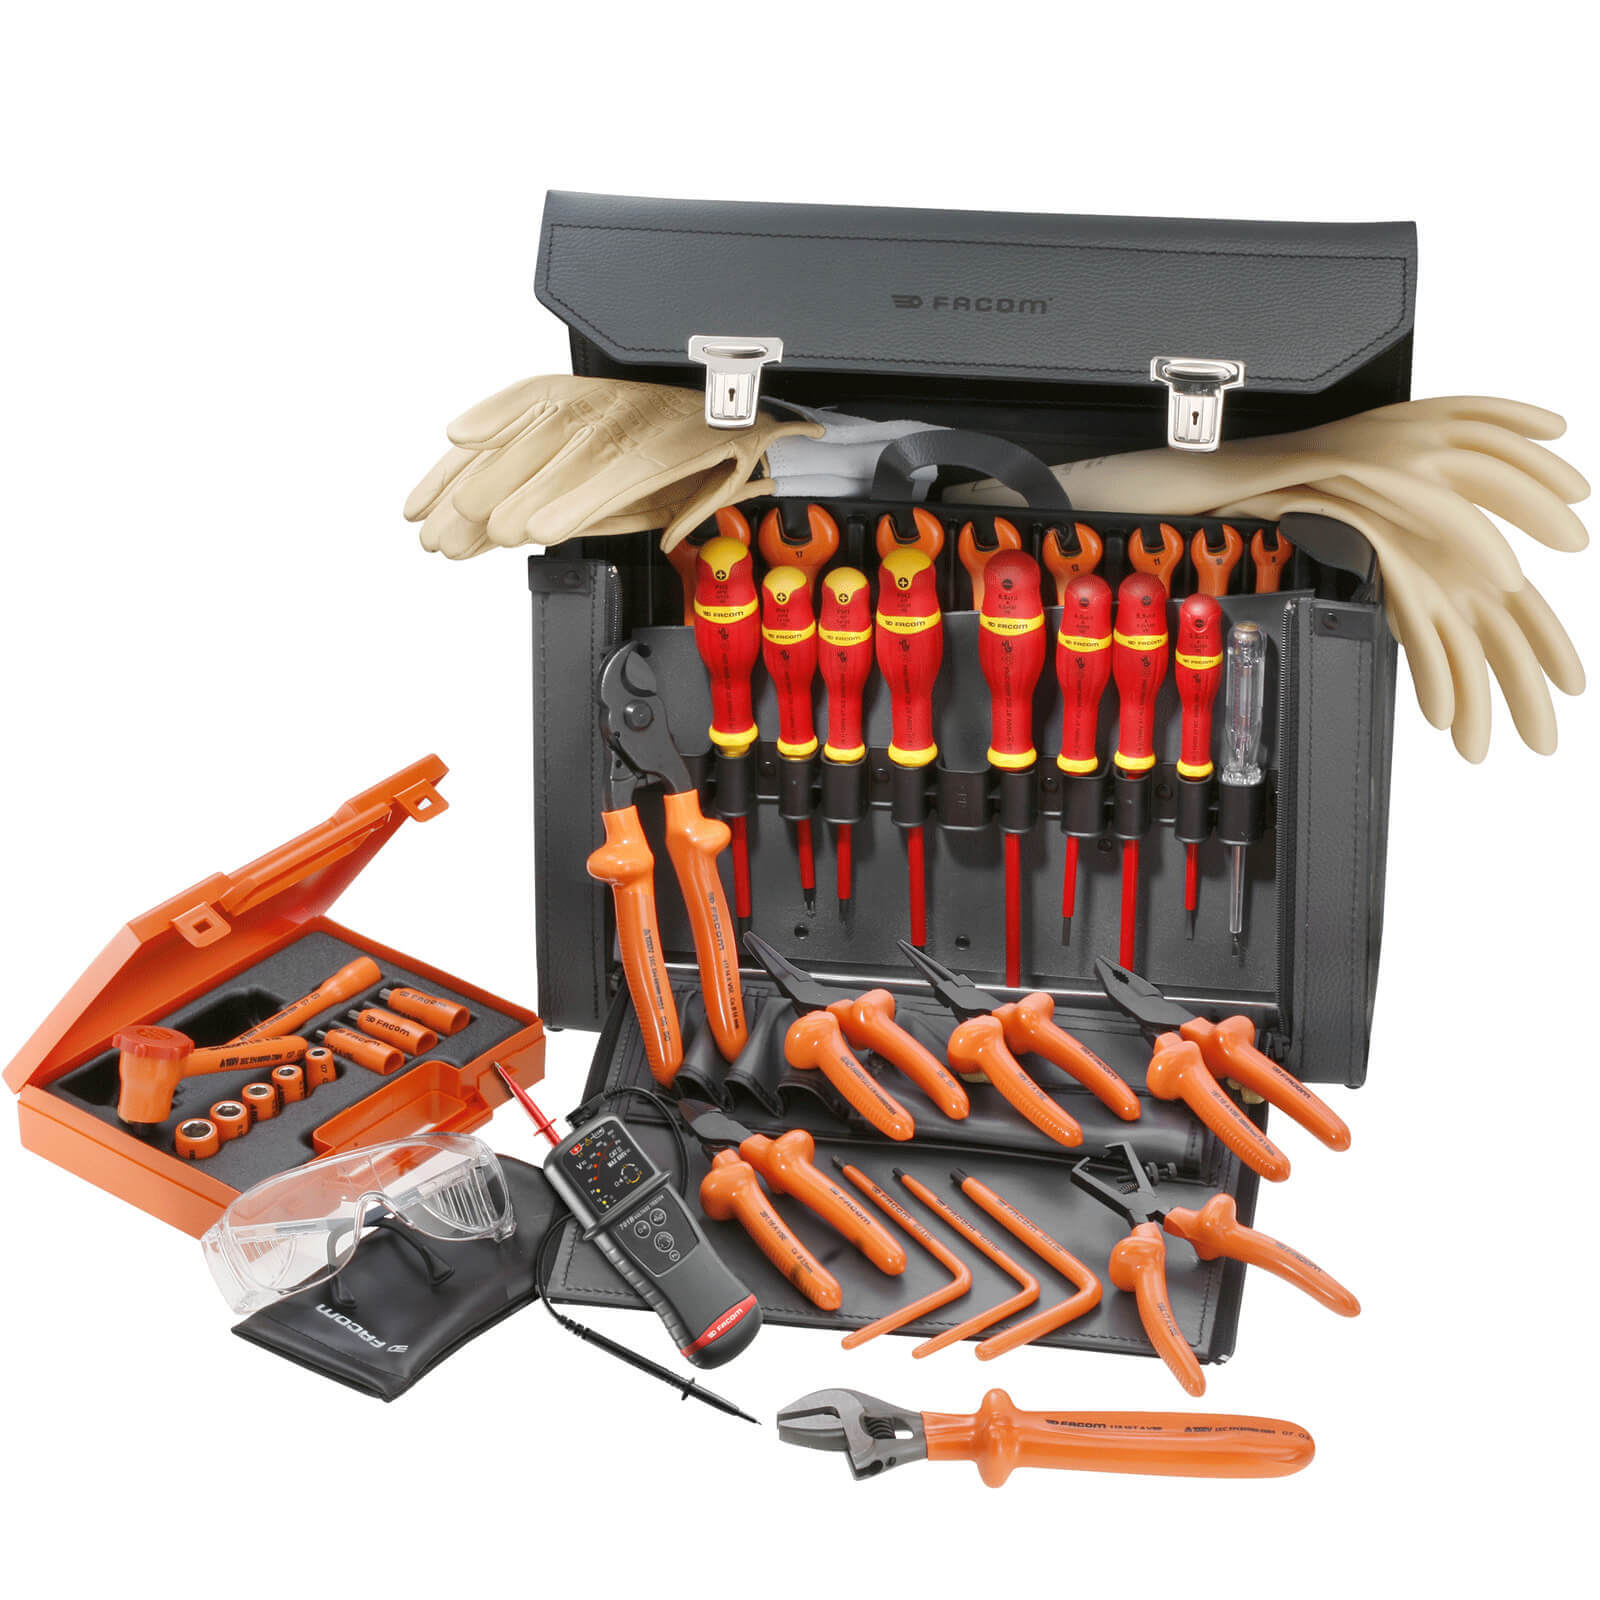 Photo of Facom 2187c.vse 32 Piece Electricians Tool Kit